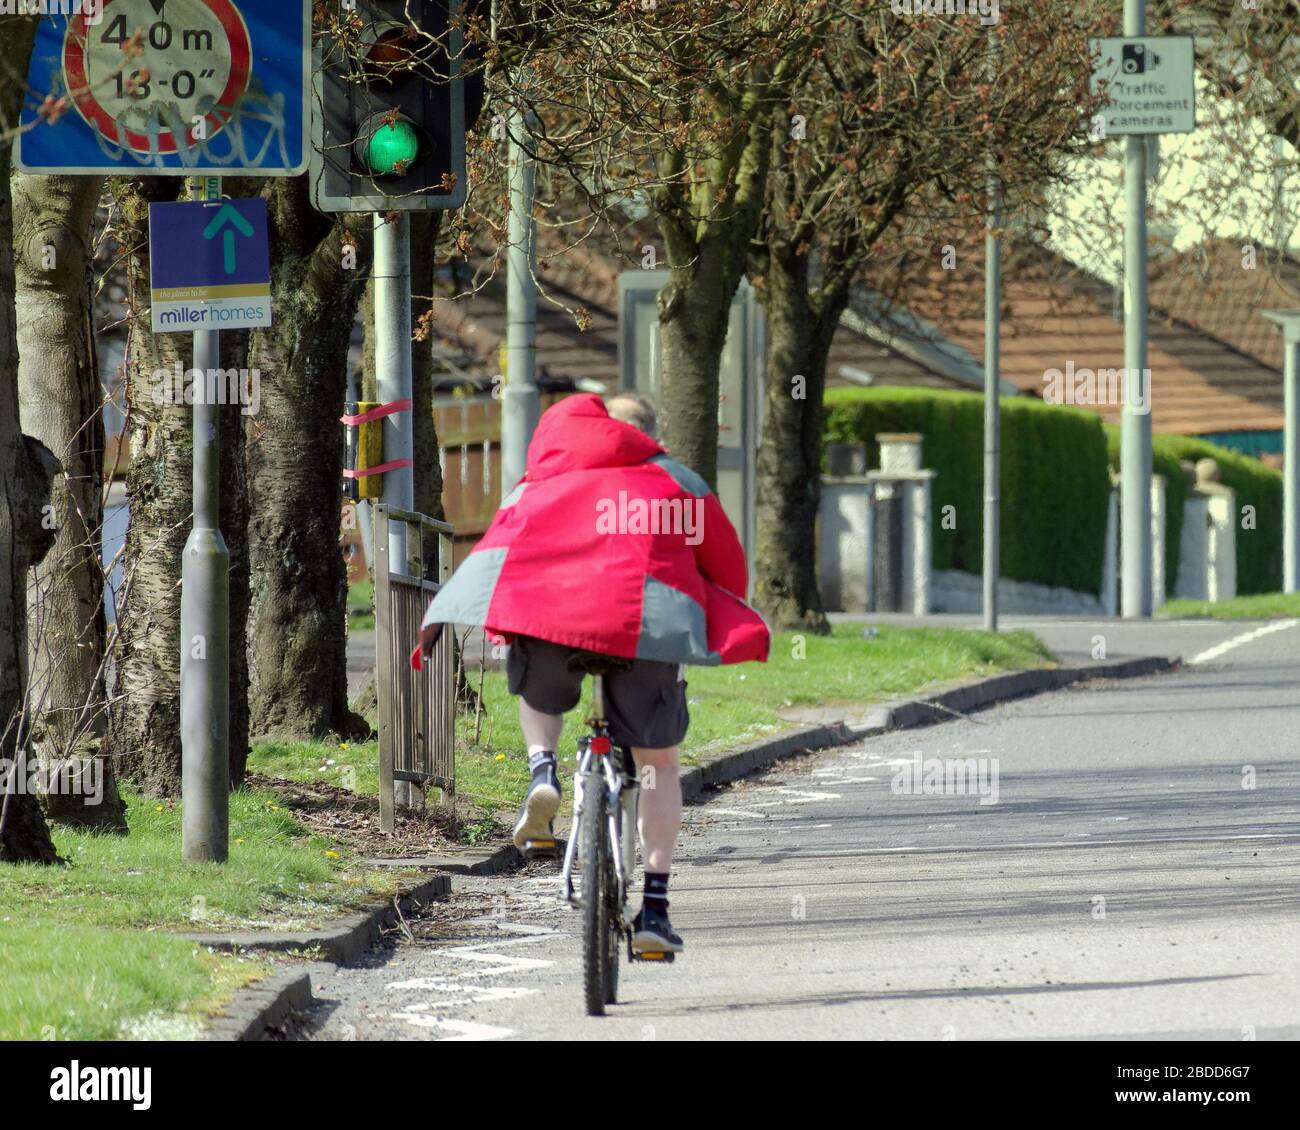 Glasgow, Scotland, UK, 8th April, 2020: Coronavirus saw deserted streets and Empty roads as people exercised on the NCR 754 Forth and Clyde canal. Gerard Ferry/ Alamy Live News Stock Photo